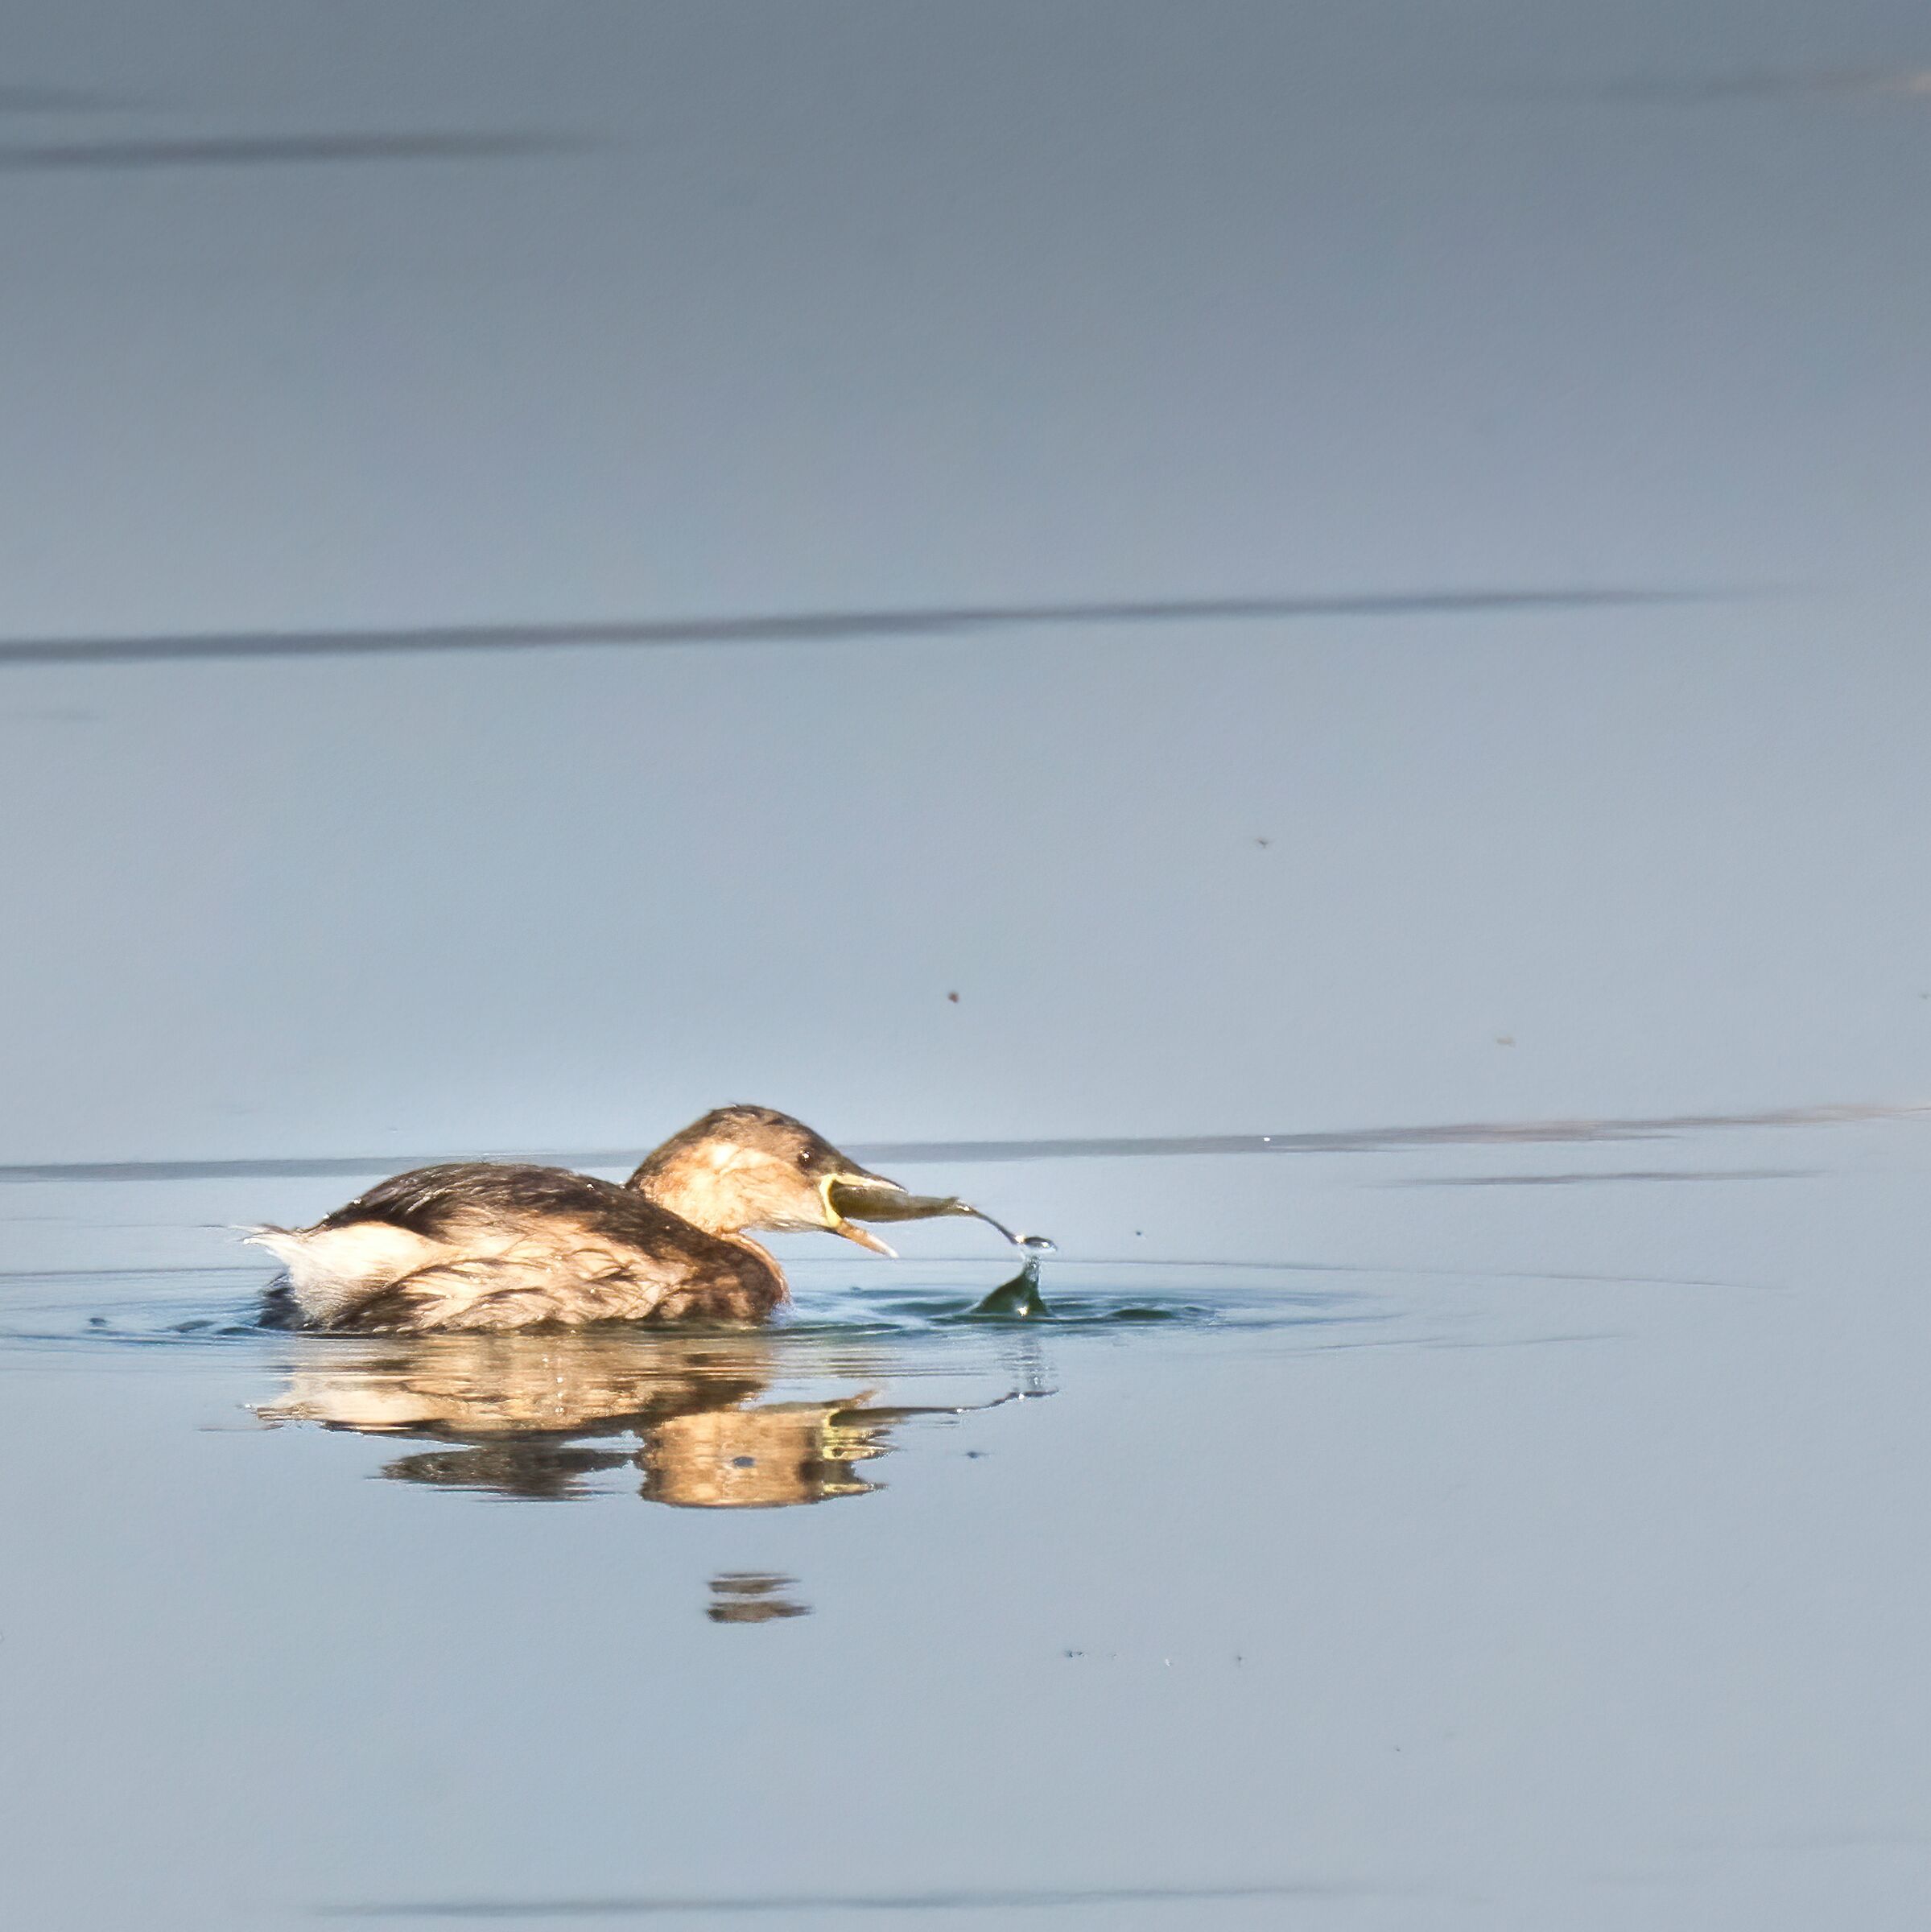 The Little Grebe's Meal...